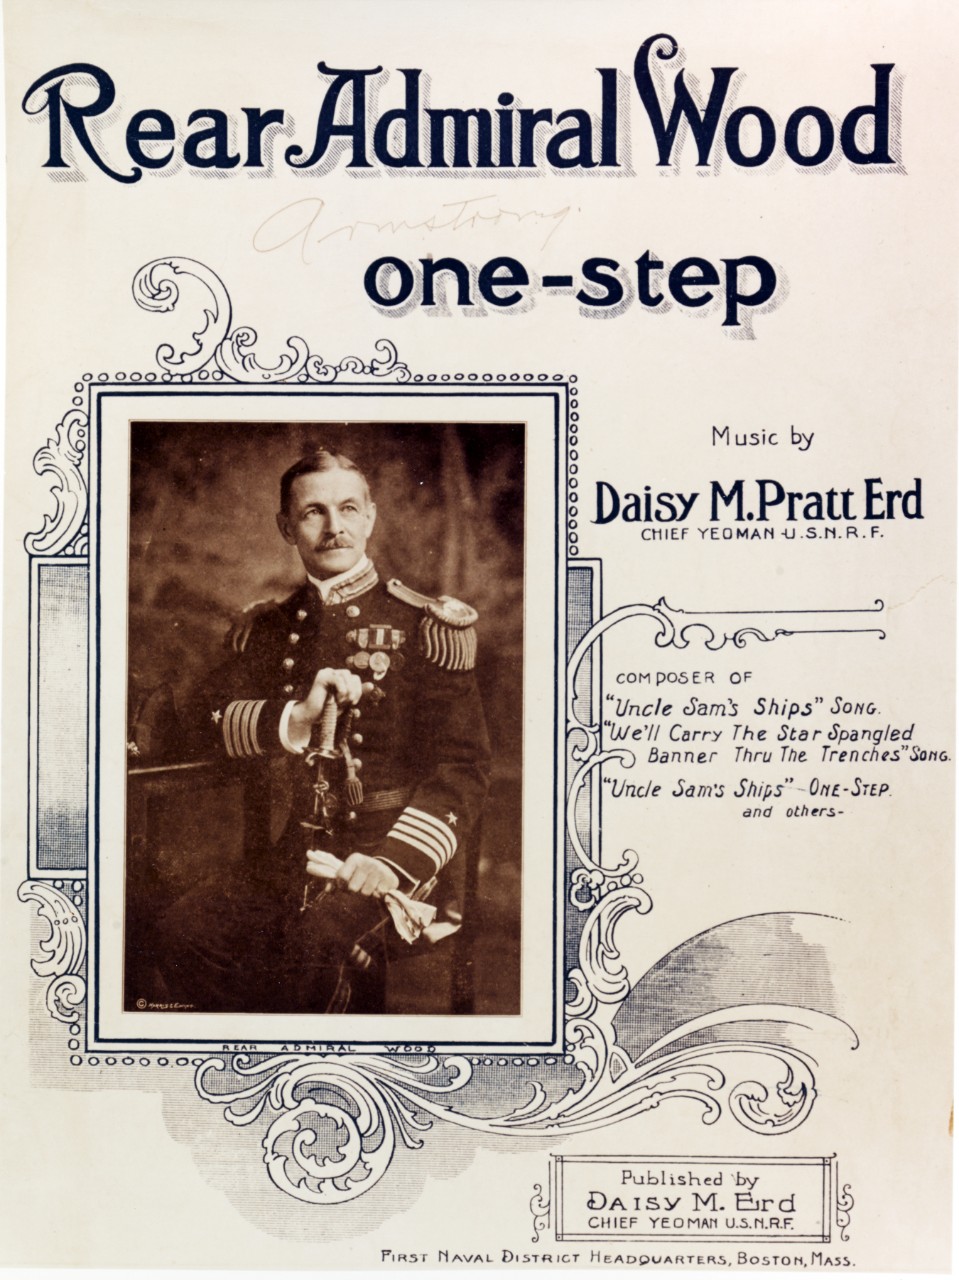 Rear Admiral Wood One-Step.   Music by Daisy M. Pratt Erd.  NHHC Photograph Collection, NH 94773-KN. 